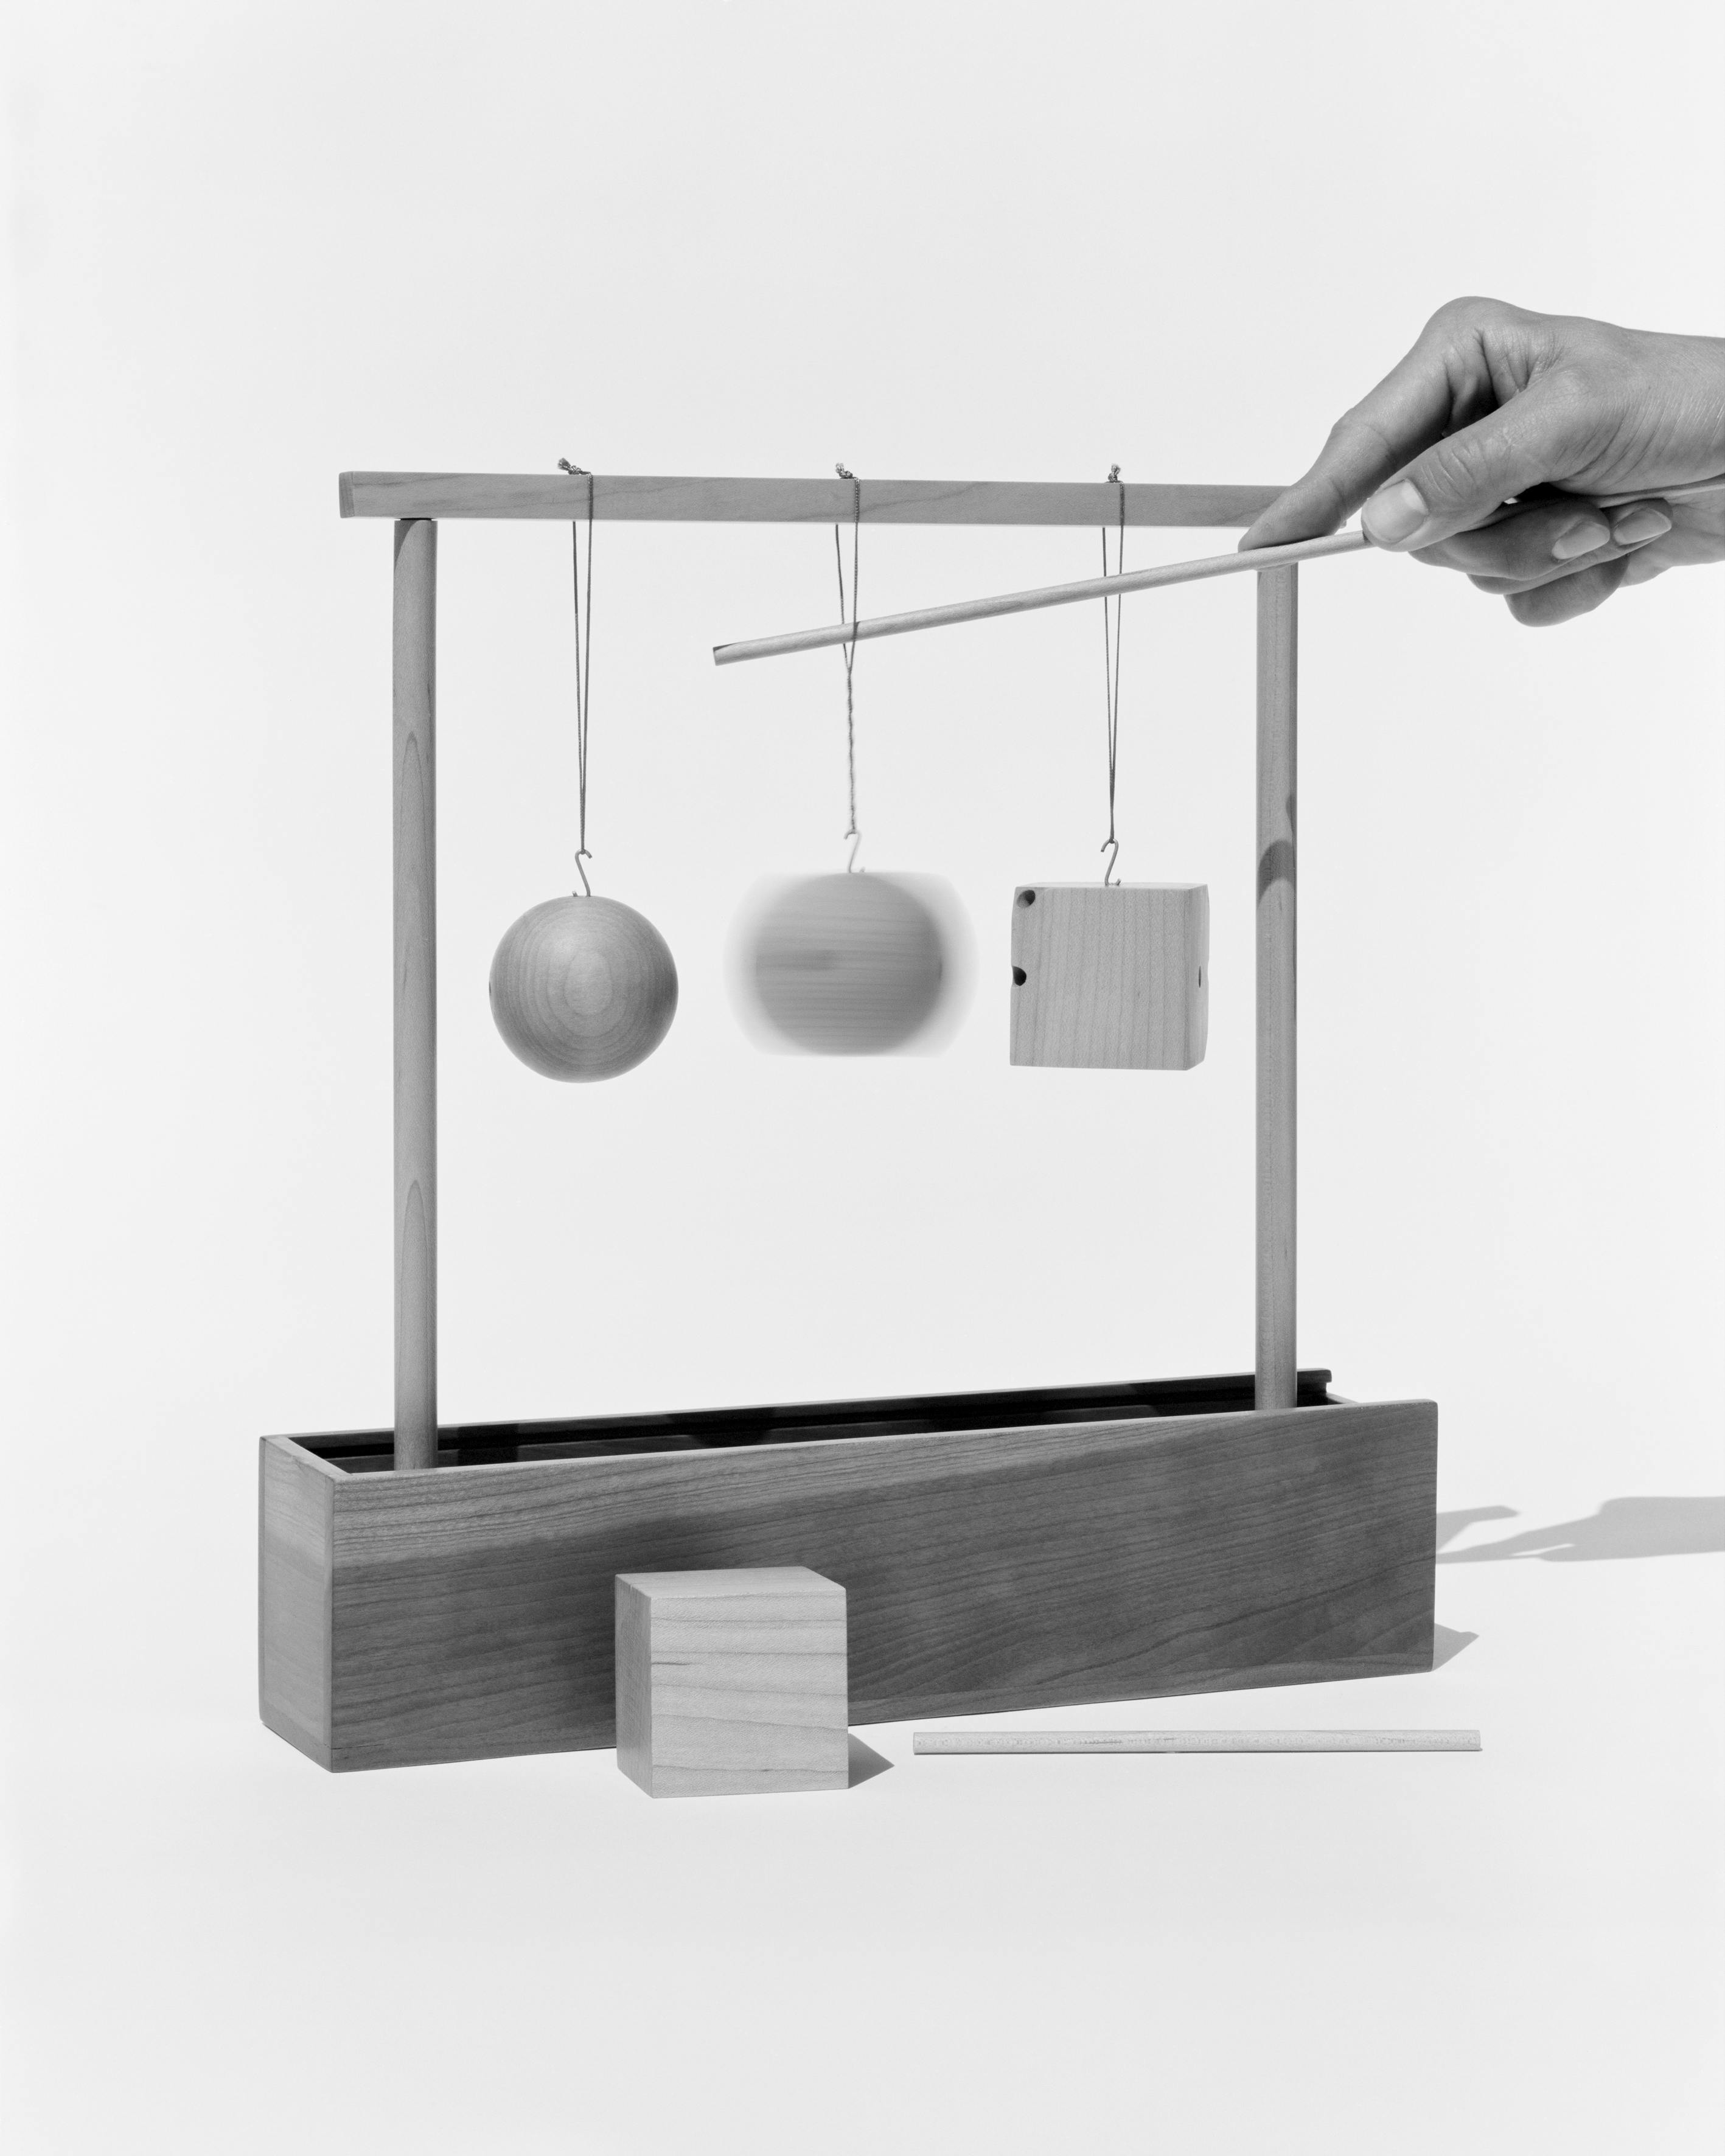 A wood object with differently-shaped blocks hanging from its simple square frame. A wood cube and dowel lay in front. A hand holding a thin wooden down reaches towards the object. 